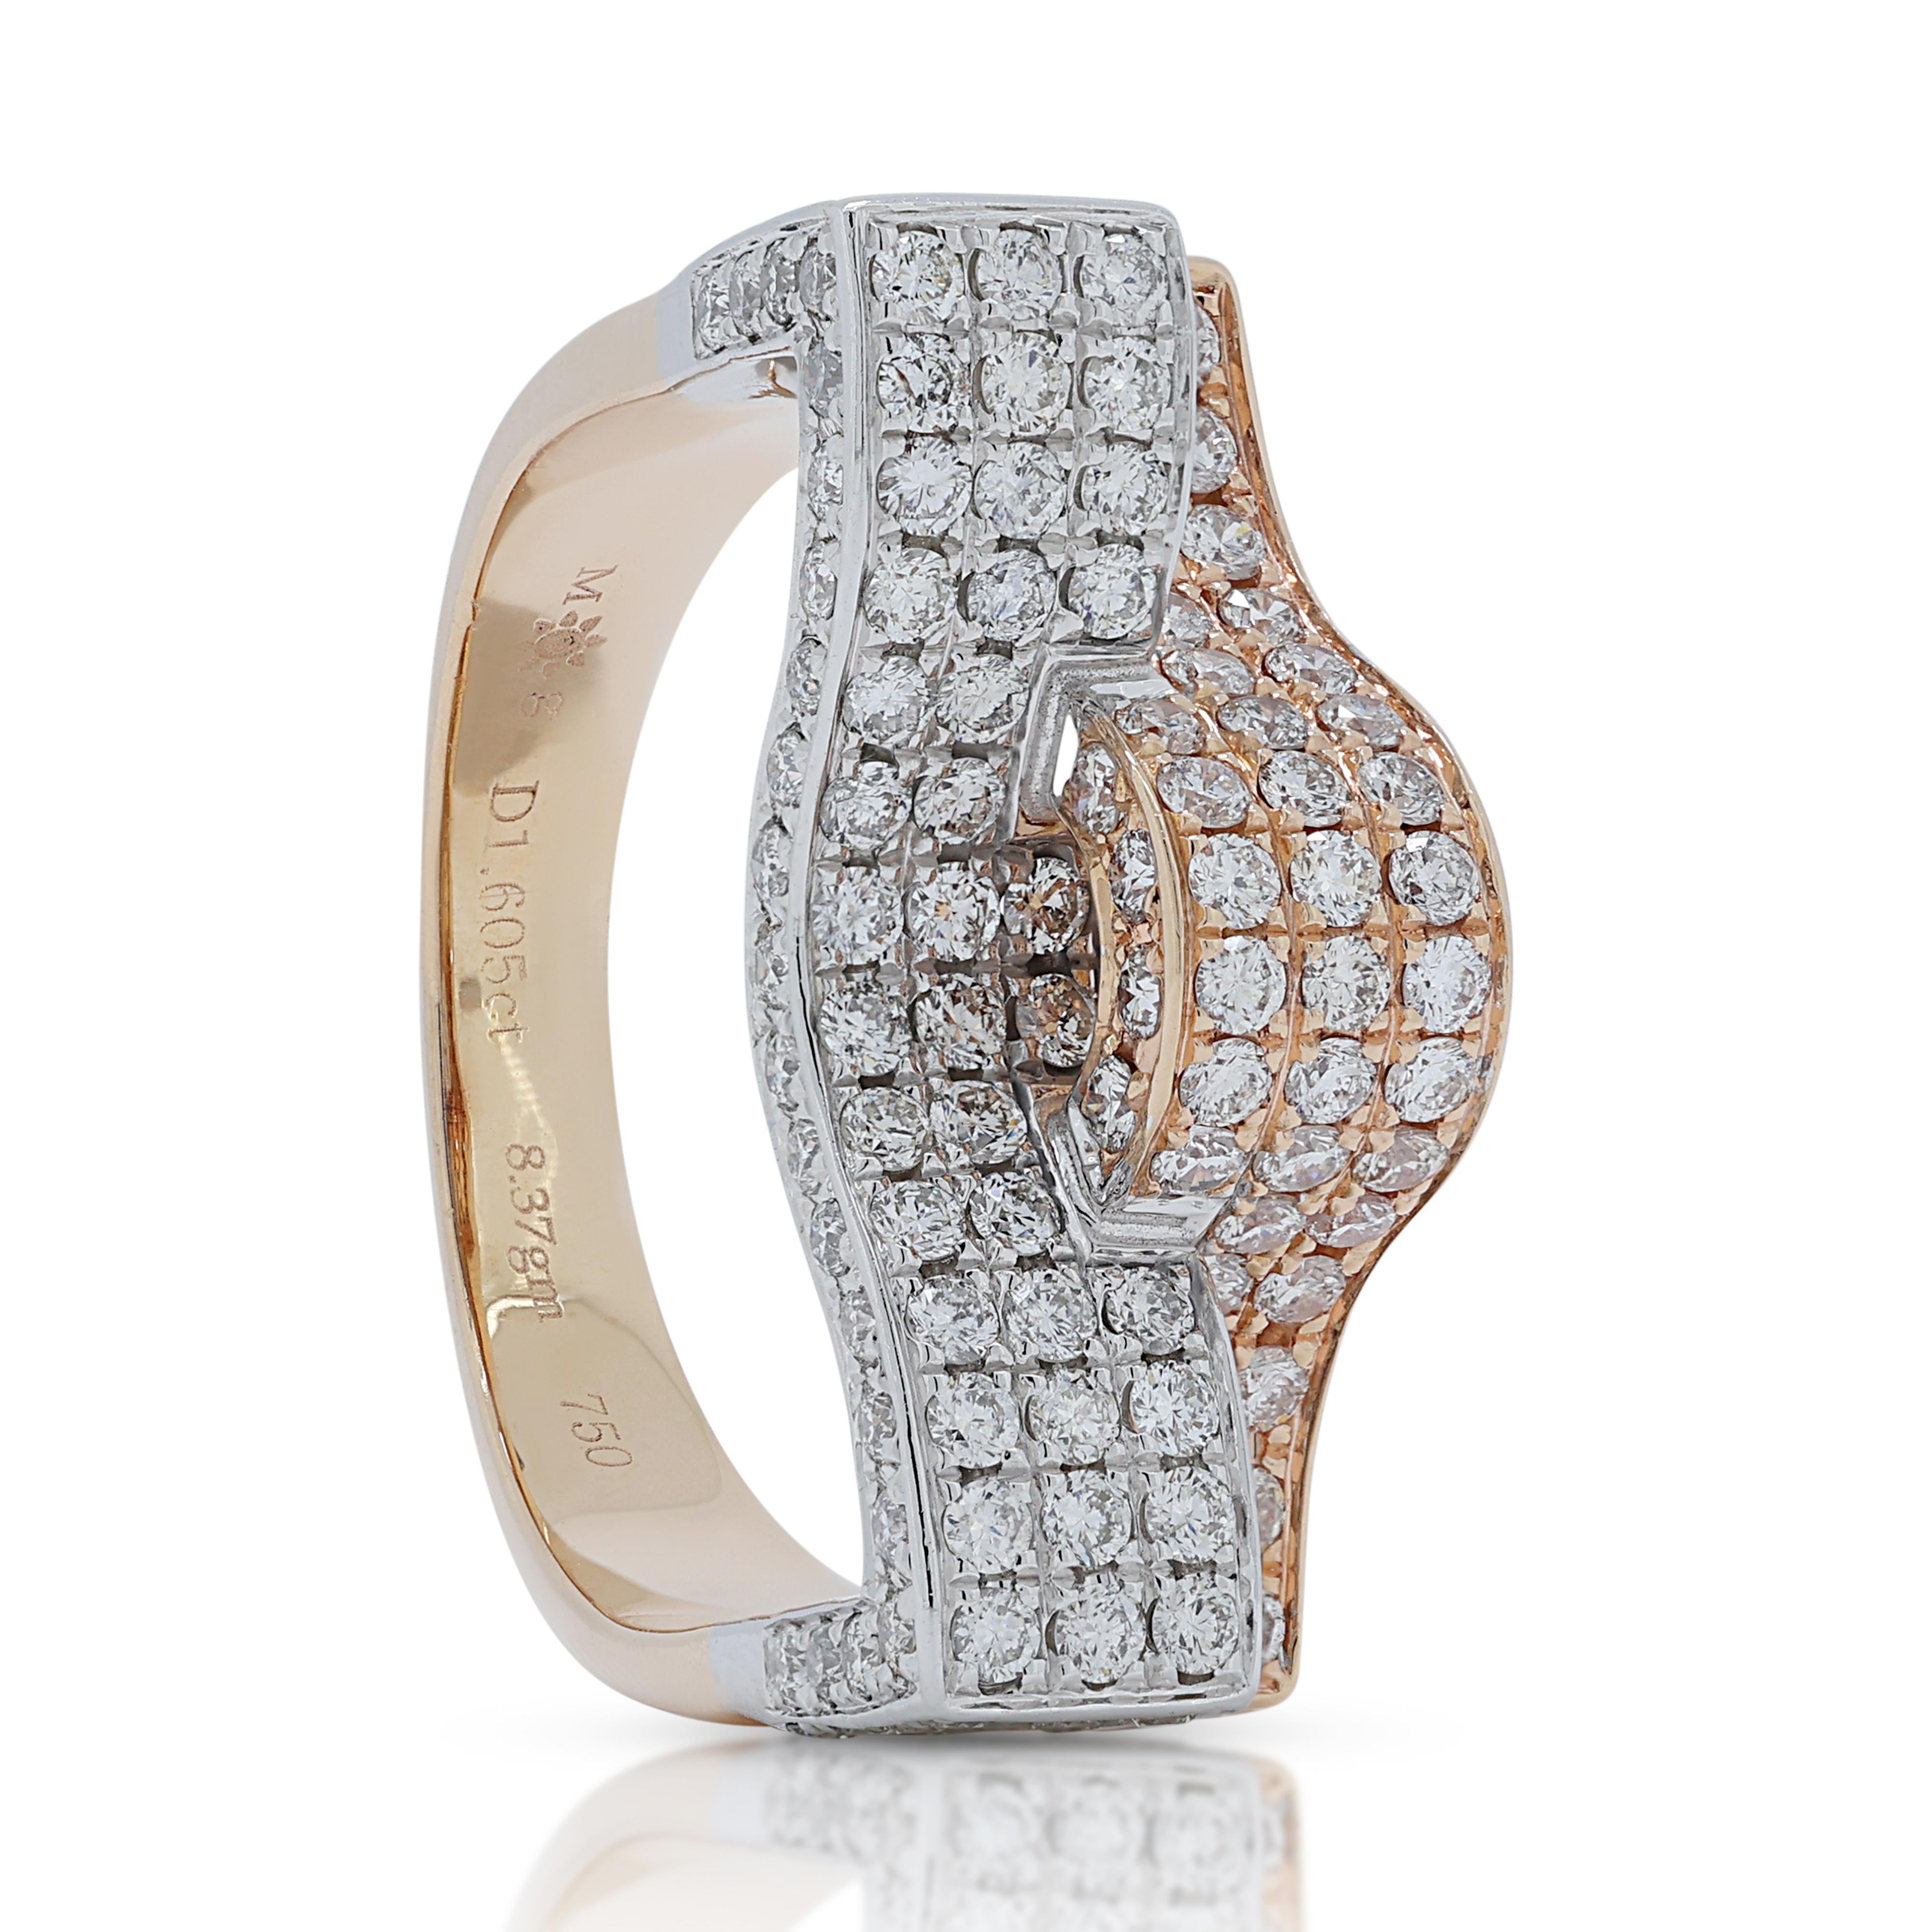 Stunning 1.60ct Diamonds Ring in 18K White & Rose Gold For Sale 2